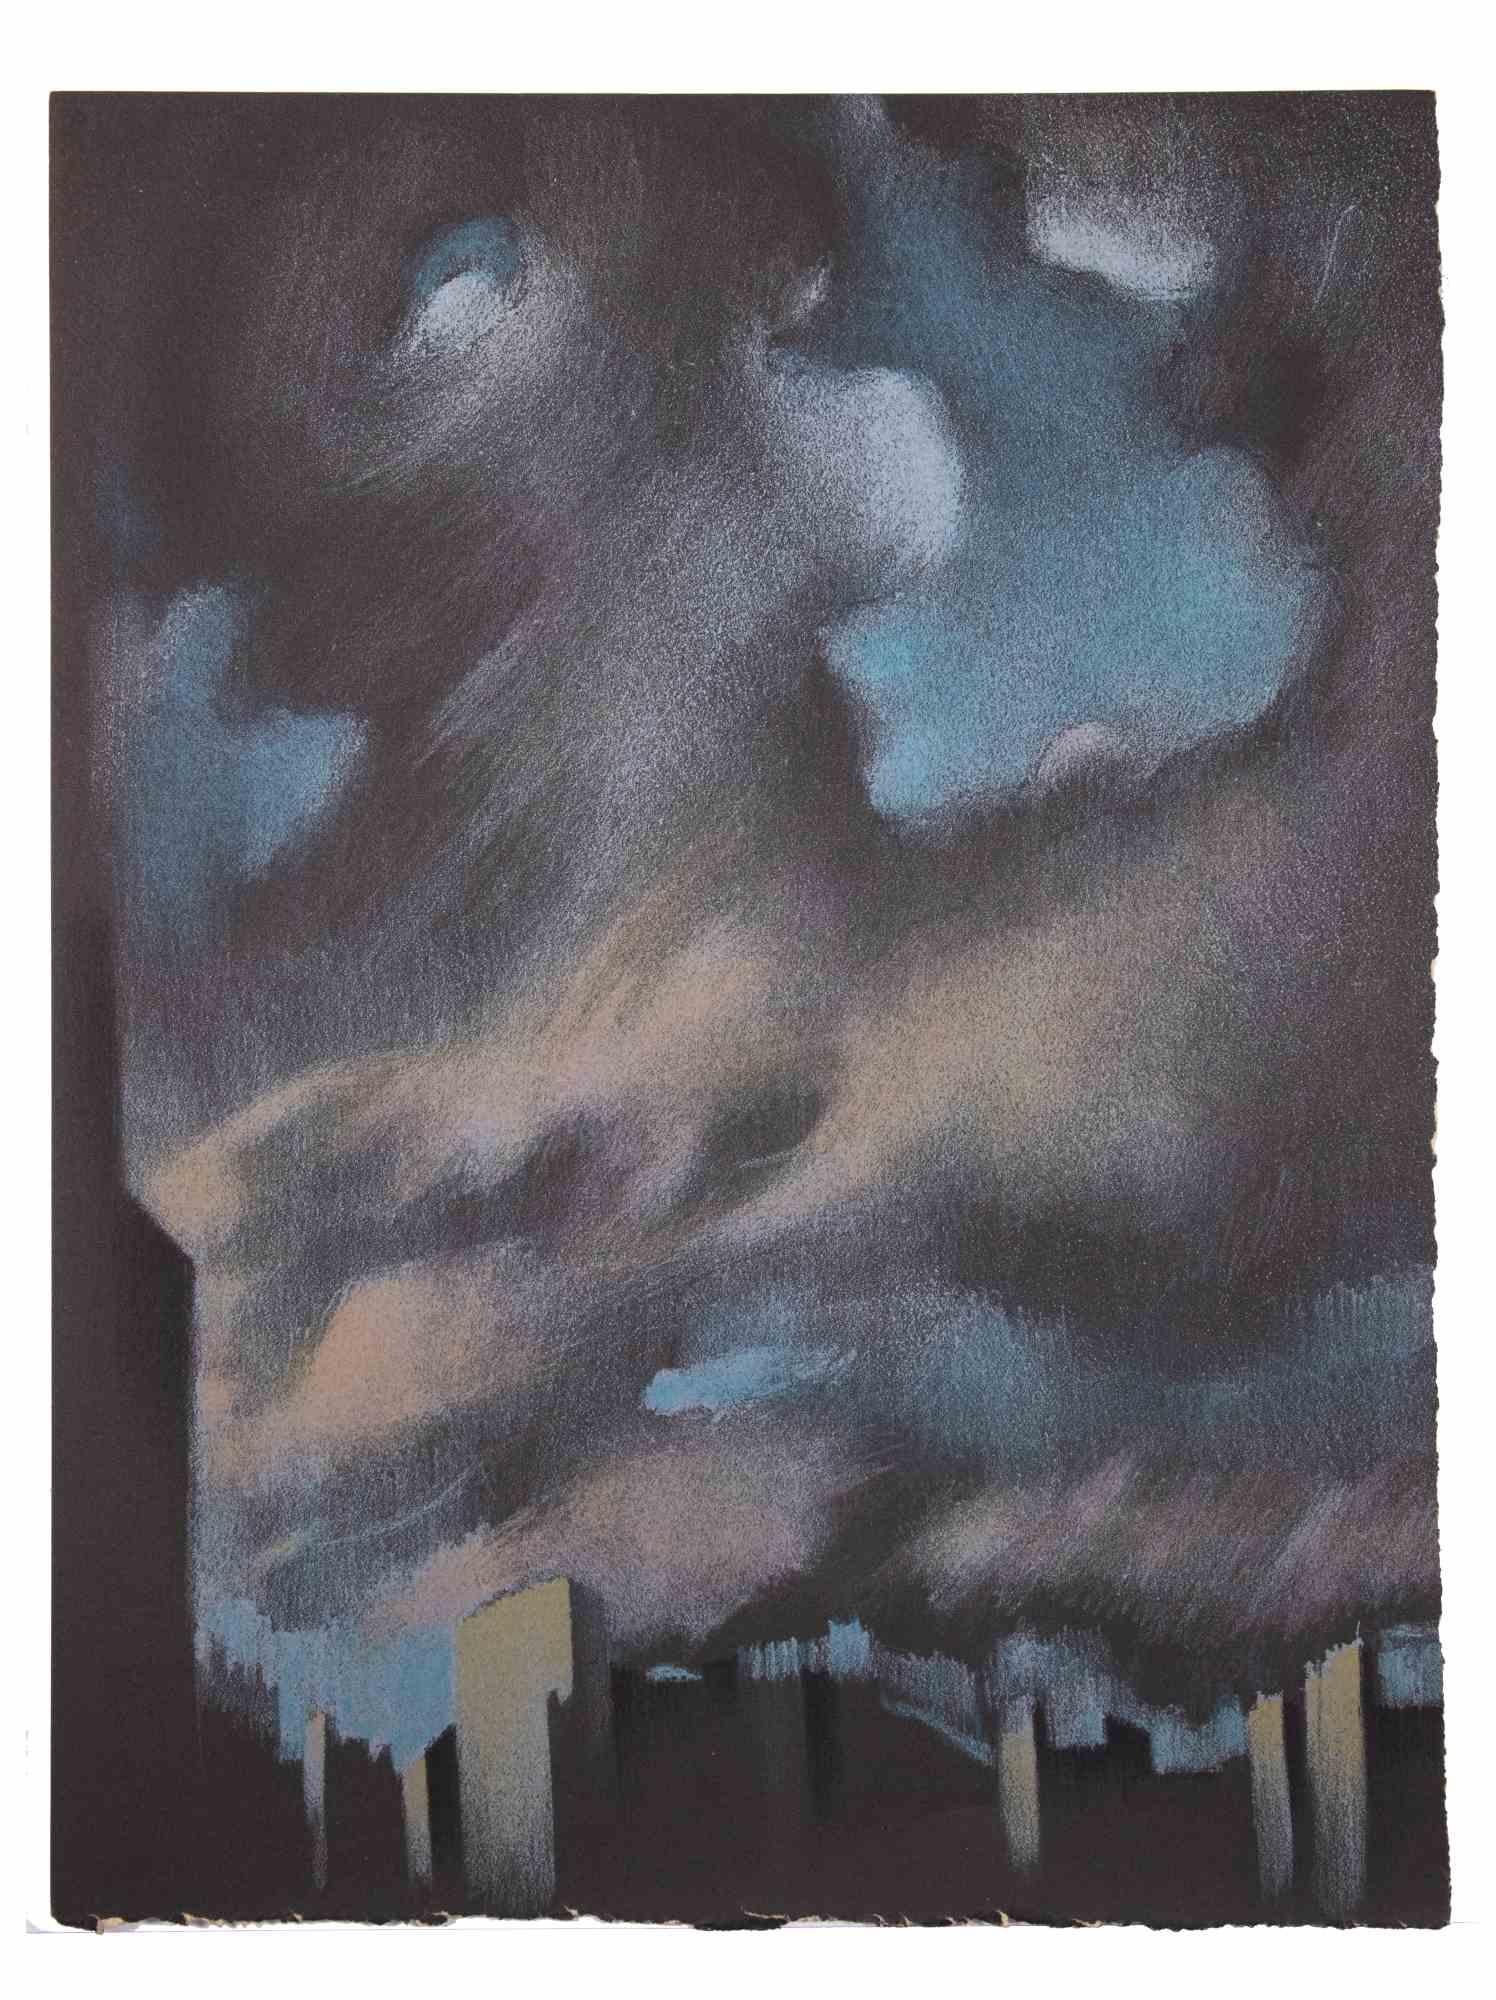 Urban Landscape with Clouds is an original mixed media, realized by Bernadette Kelly in about 1980 s. The artwork is not signed.

The artist depicts the night city, where there are houses and  in the background the sky with clouds .

Good